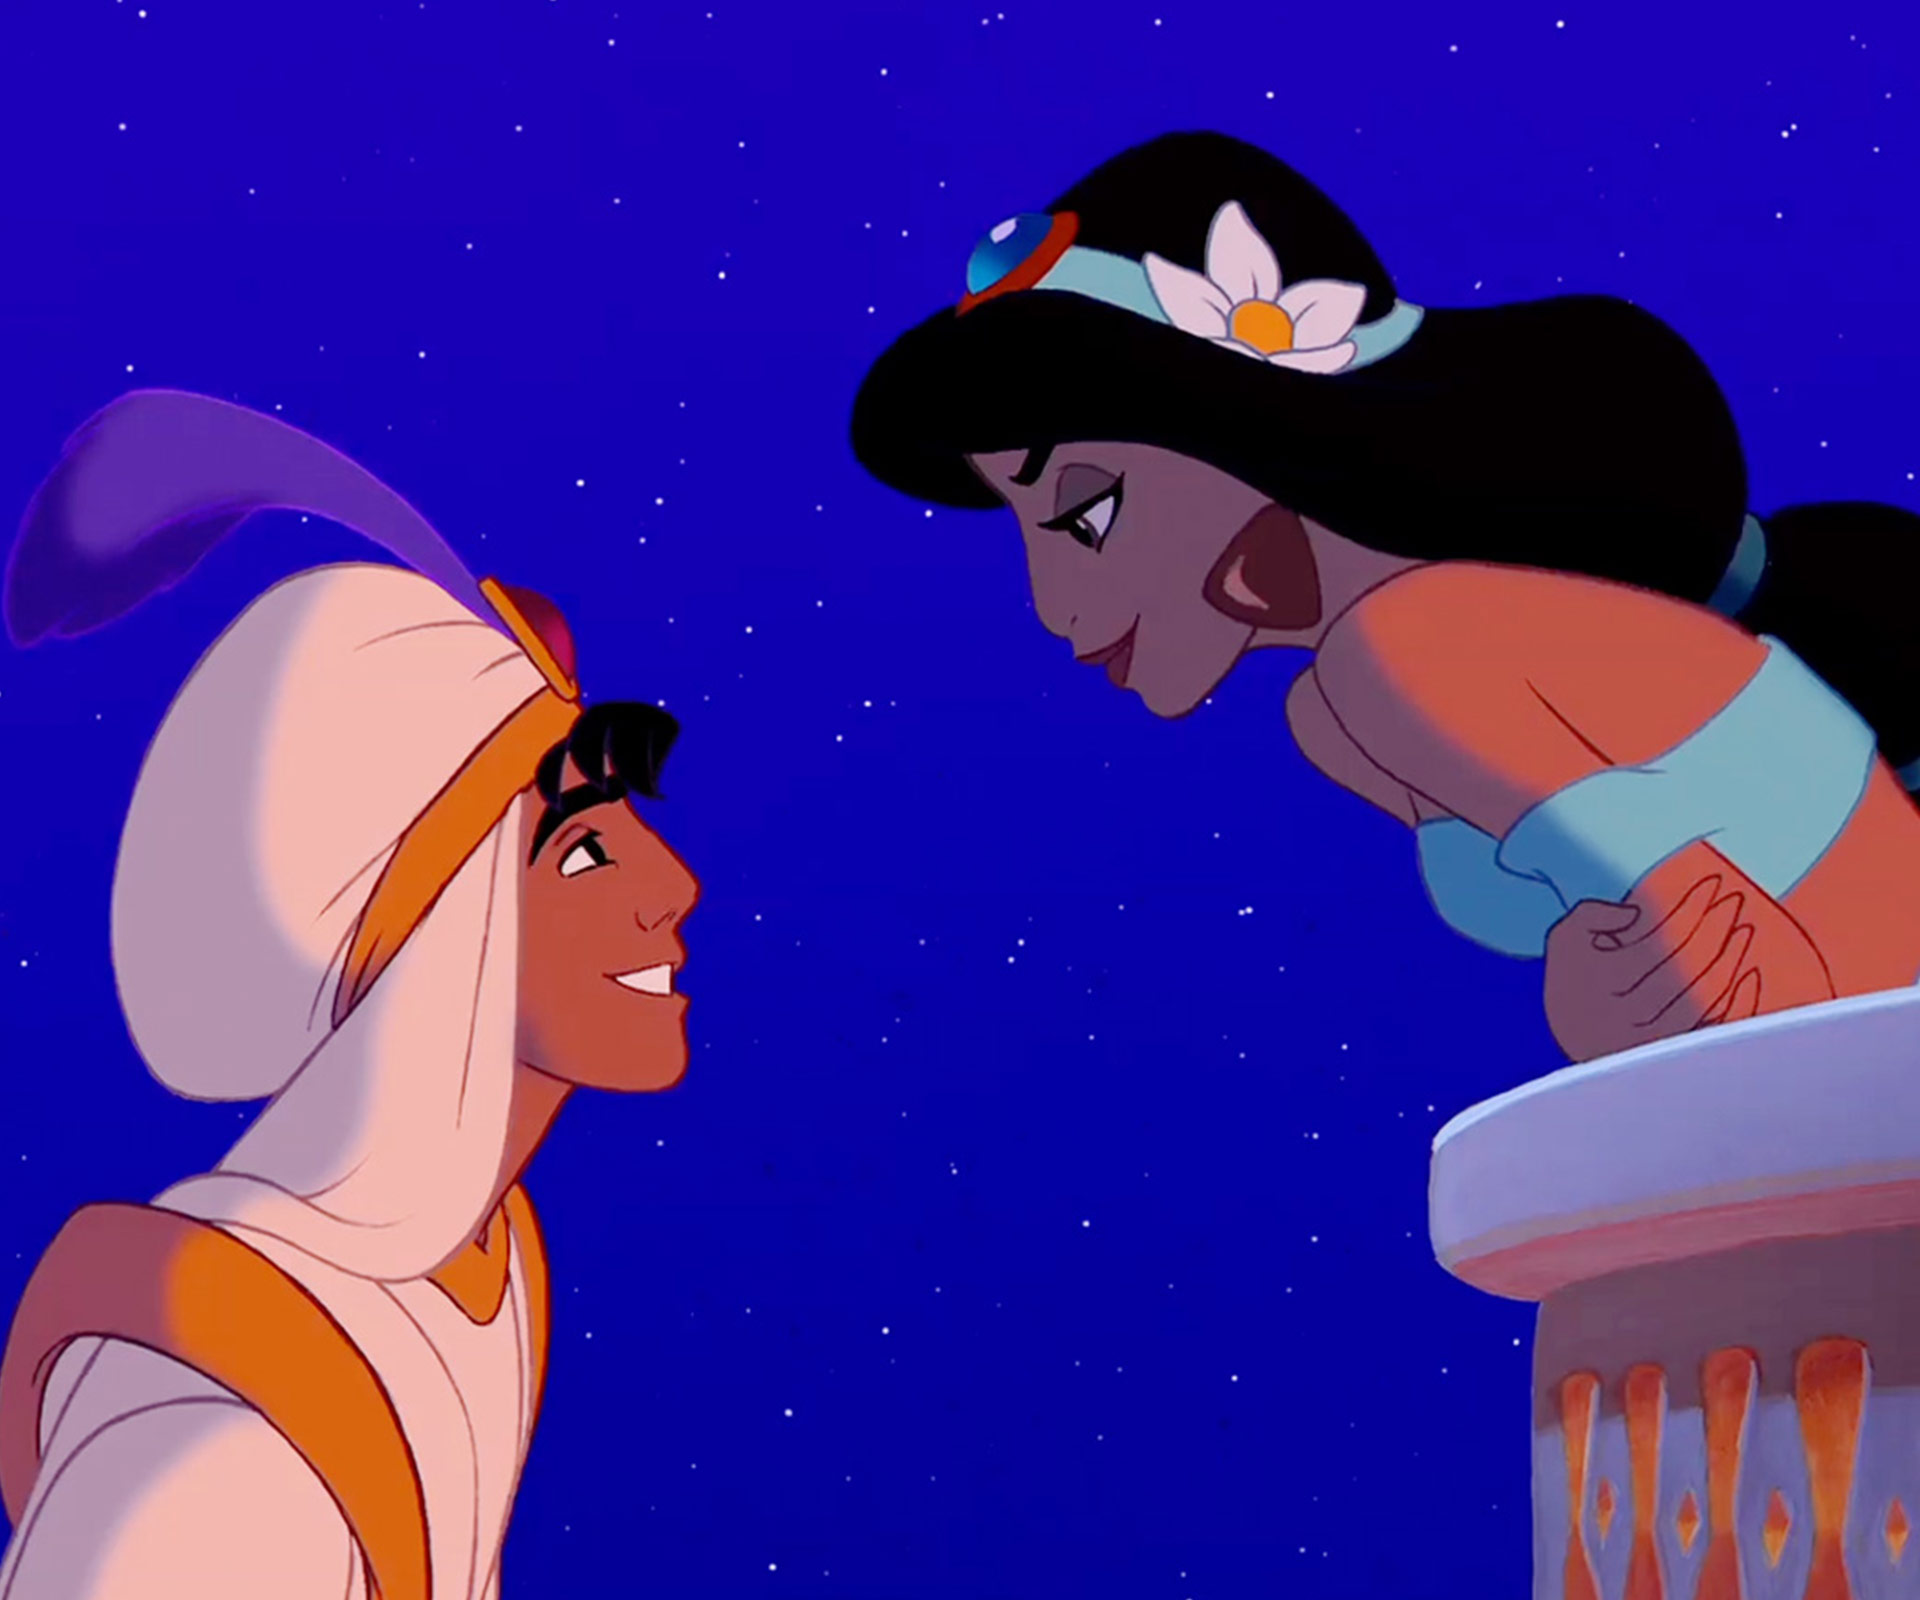 Aladdin Reunion is everything you’d imagine (and so much more!)